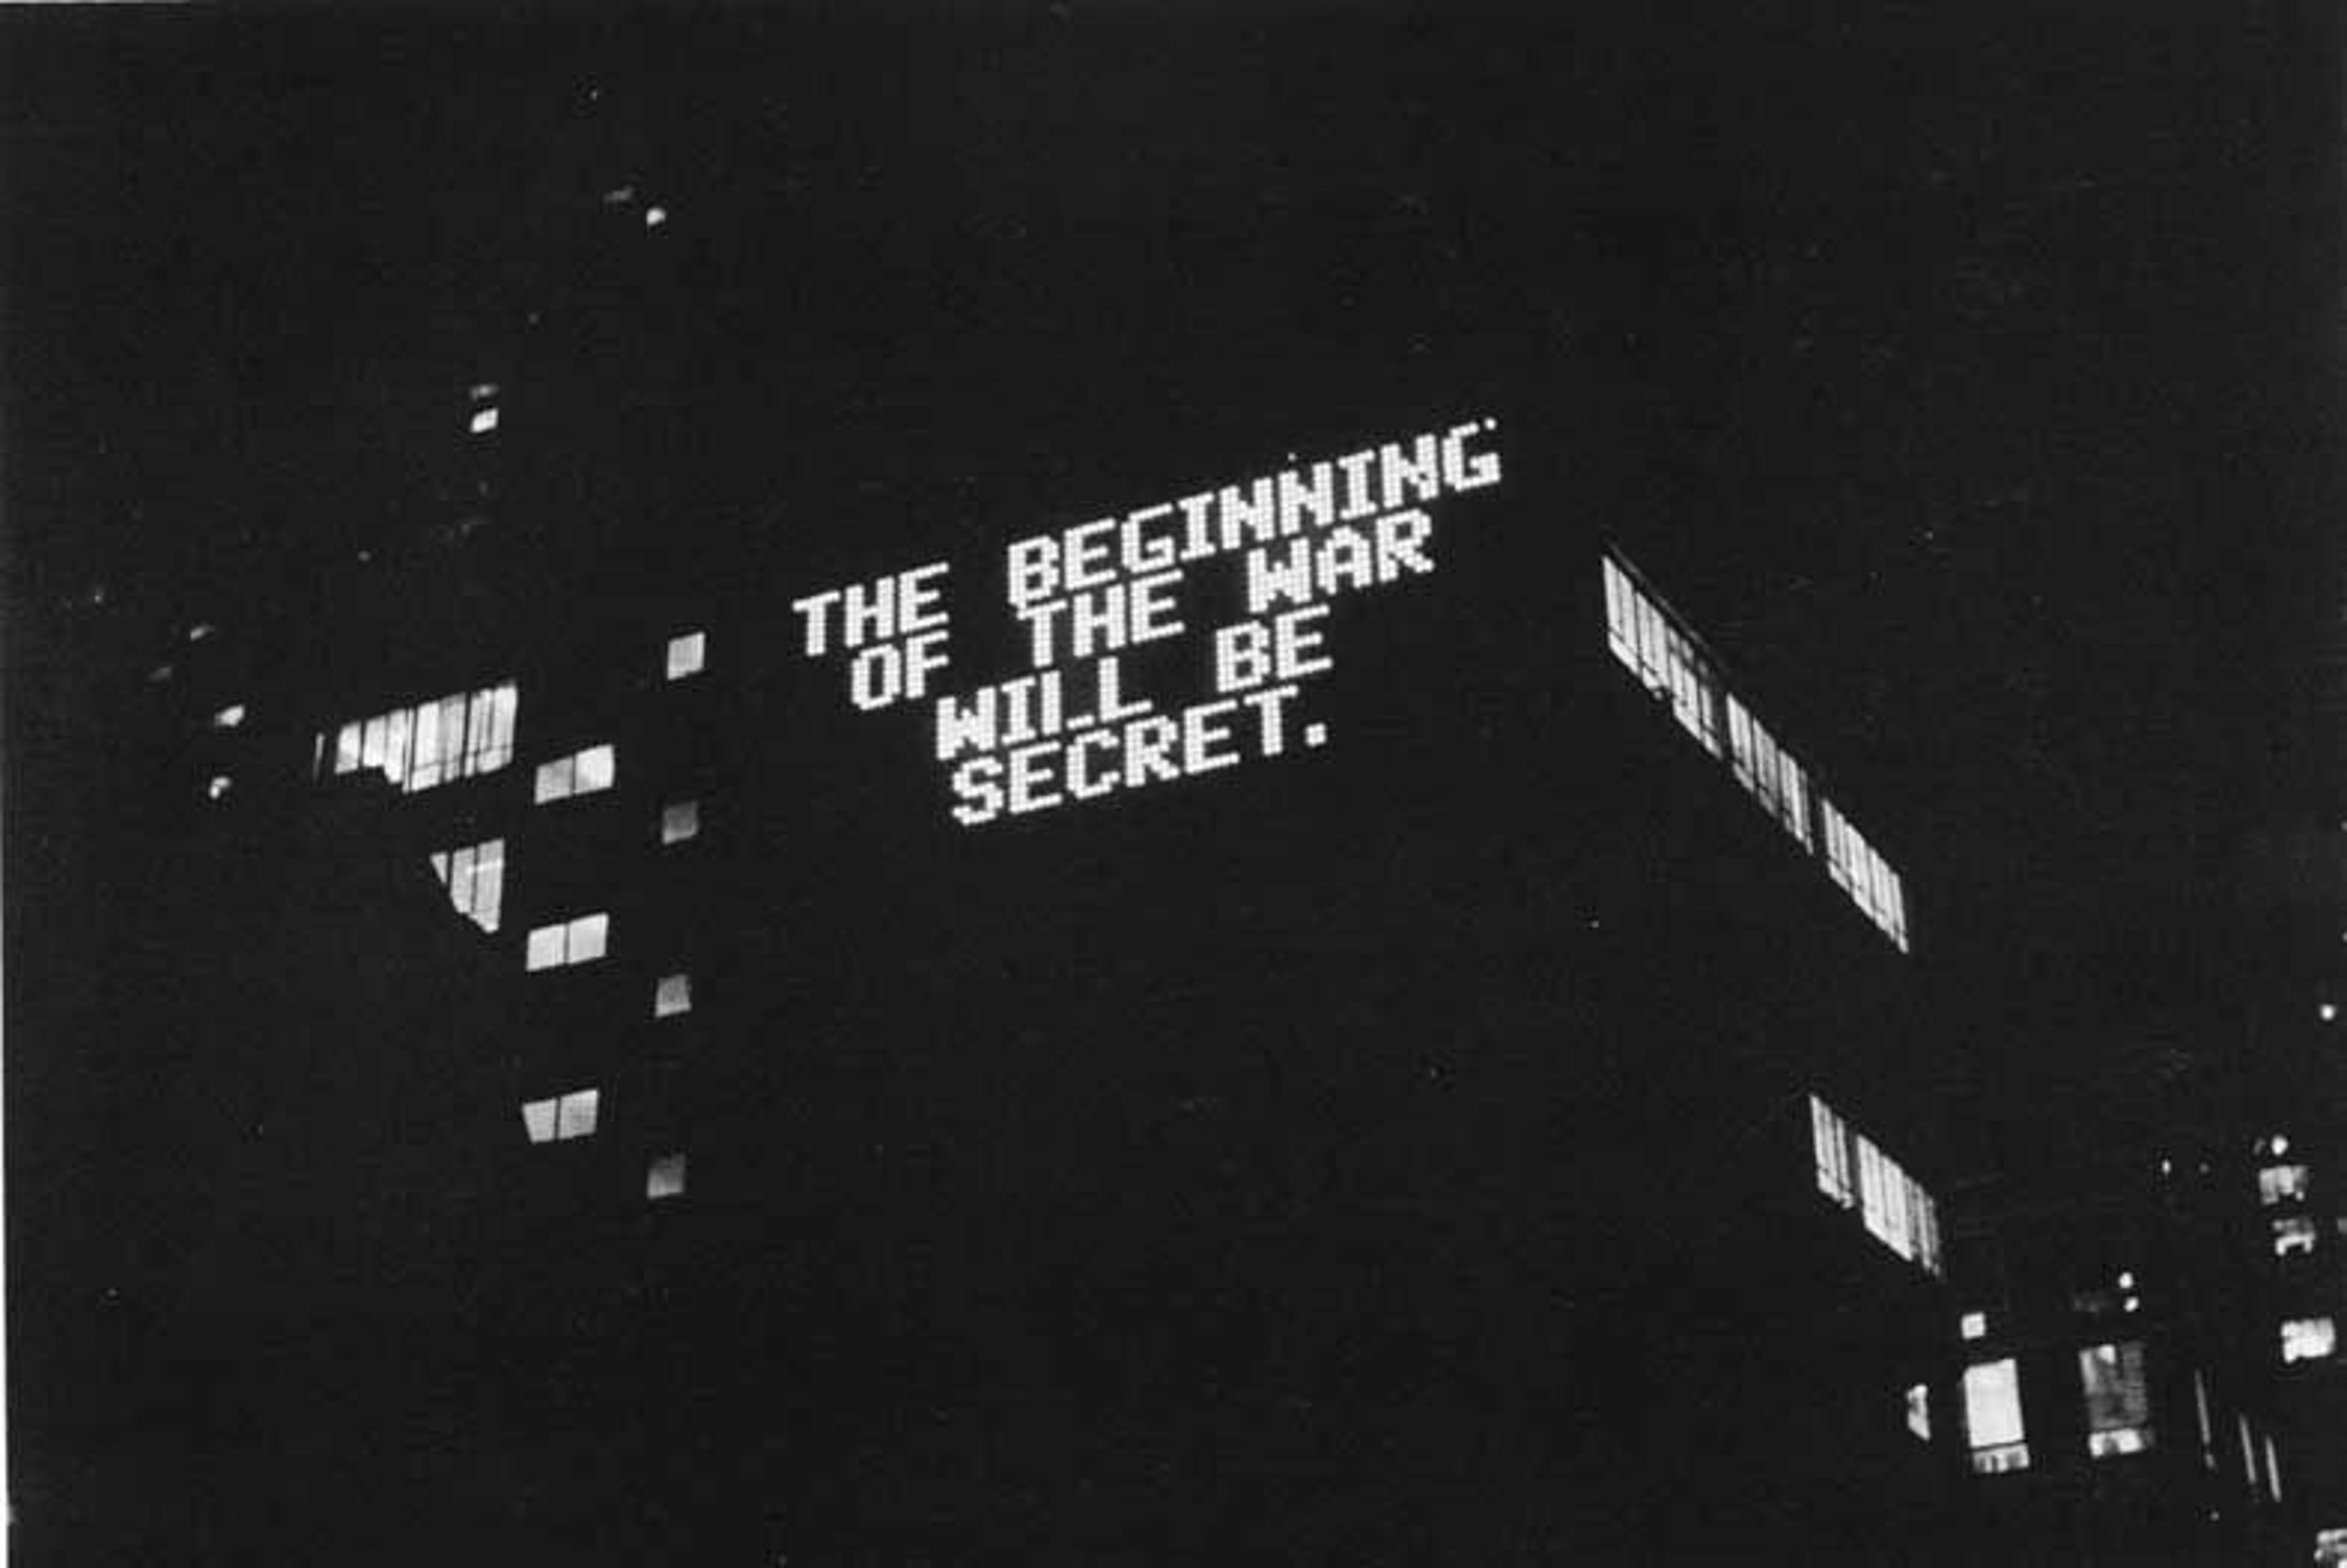 Projected on a building: the beginning of the war will be secret 